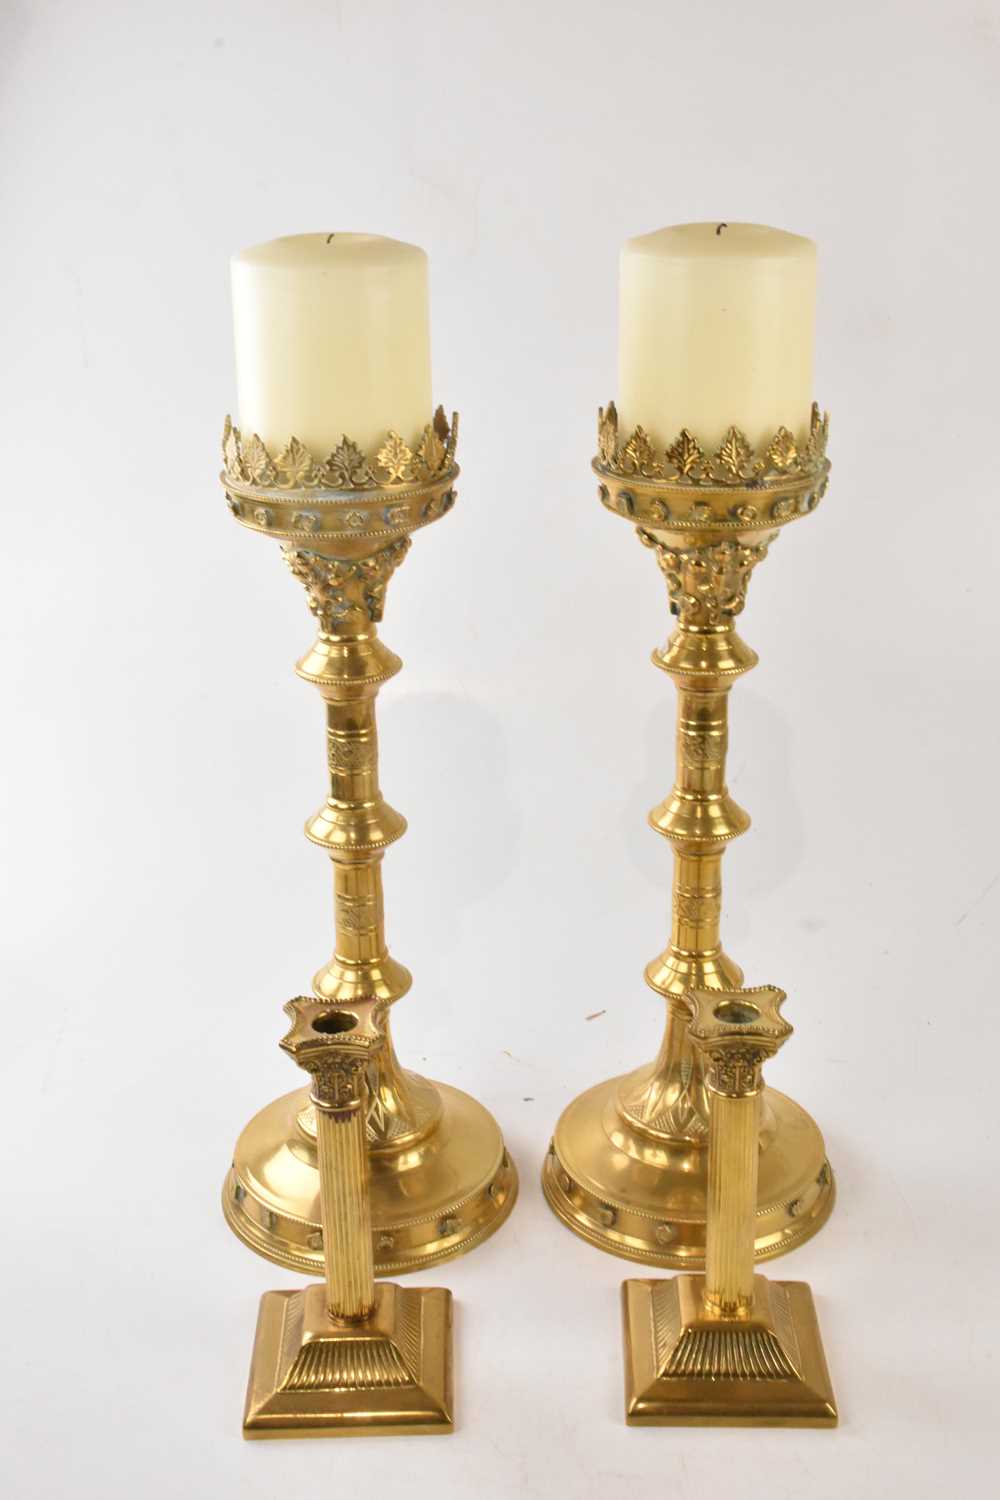 Gothic Candle Holders for Sale at Auction